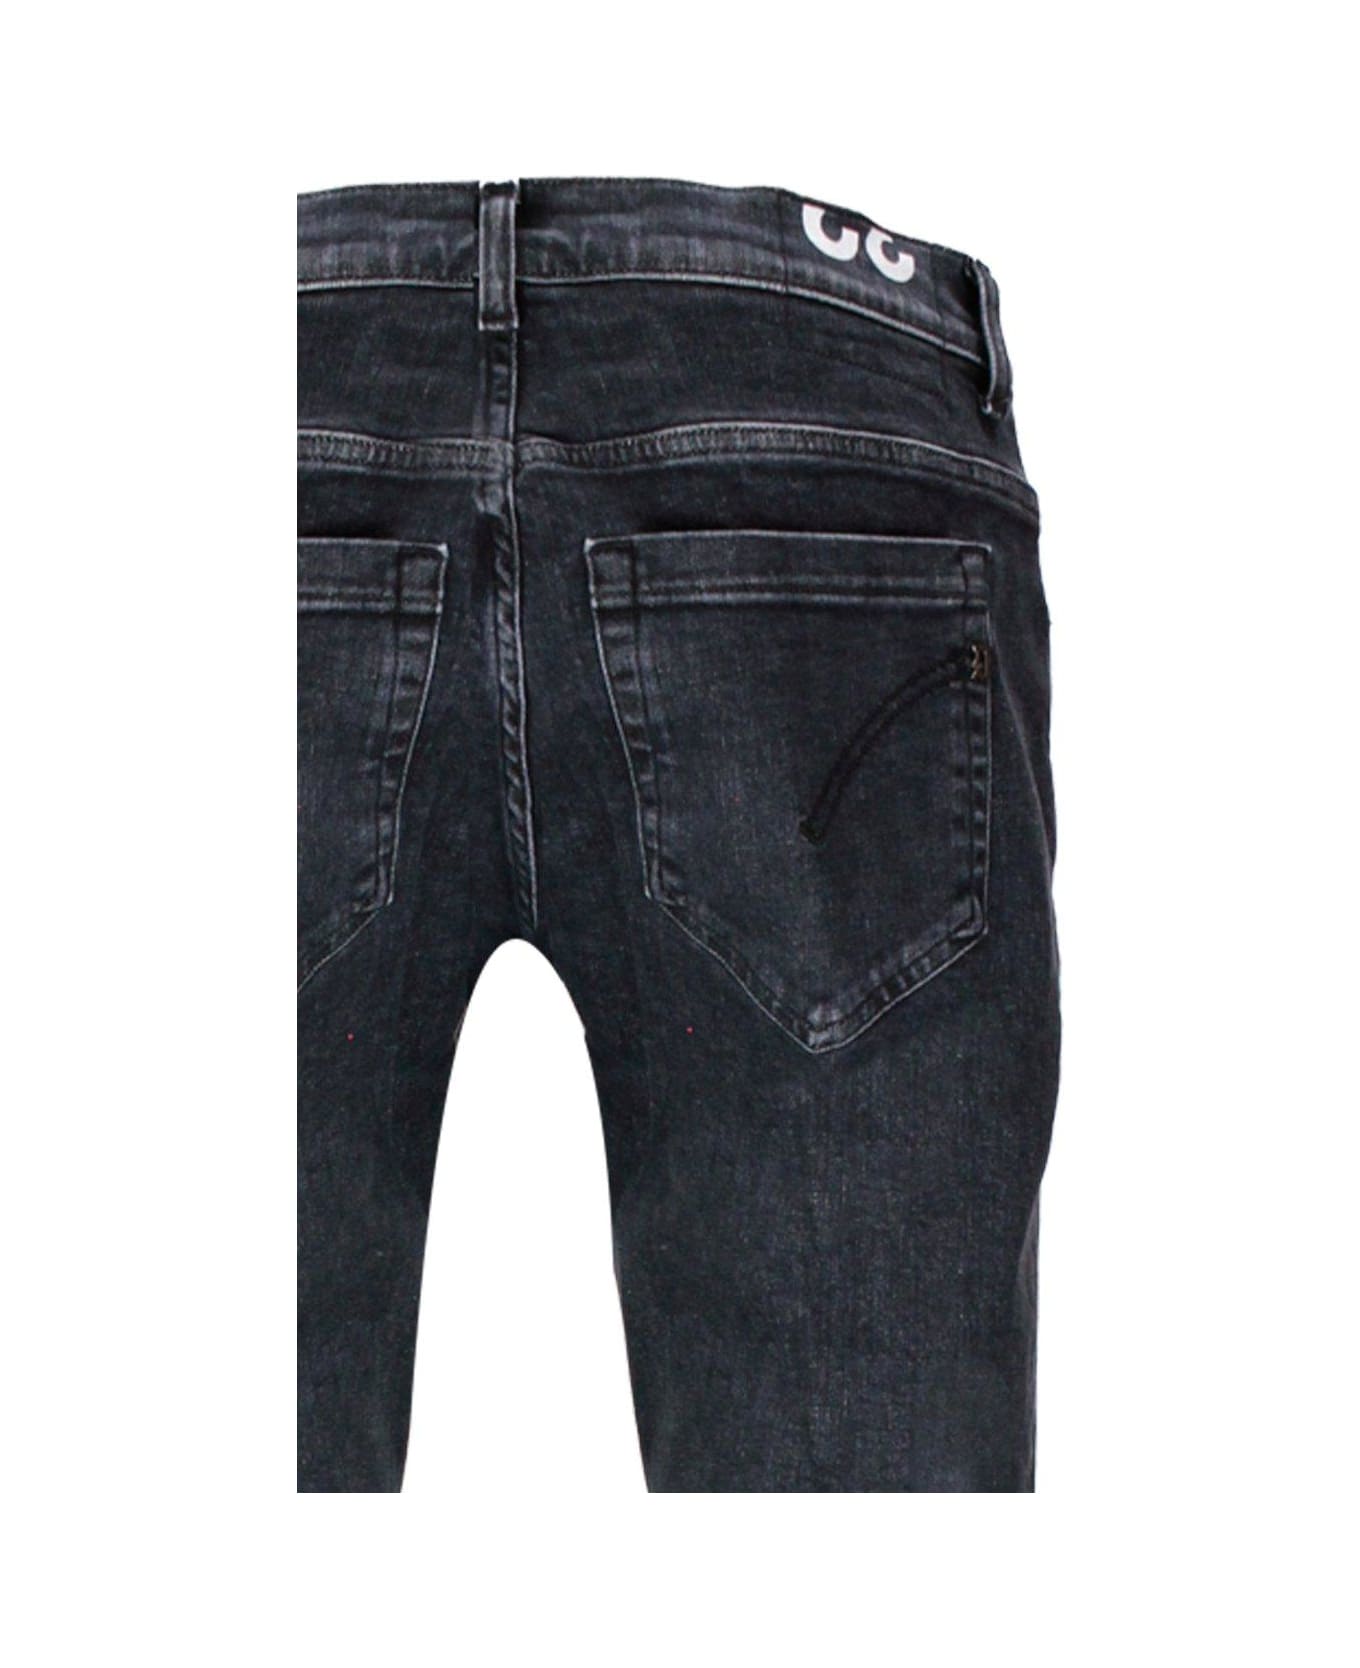 Dondup Turn-up Cuffs Stretched Jeans Dondup - BLACK